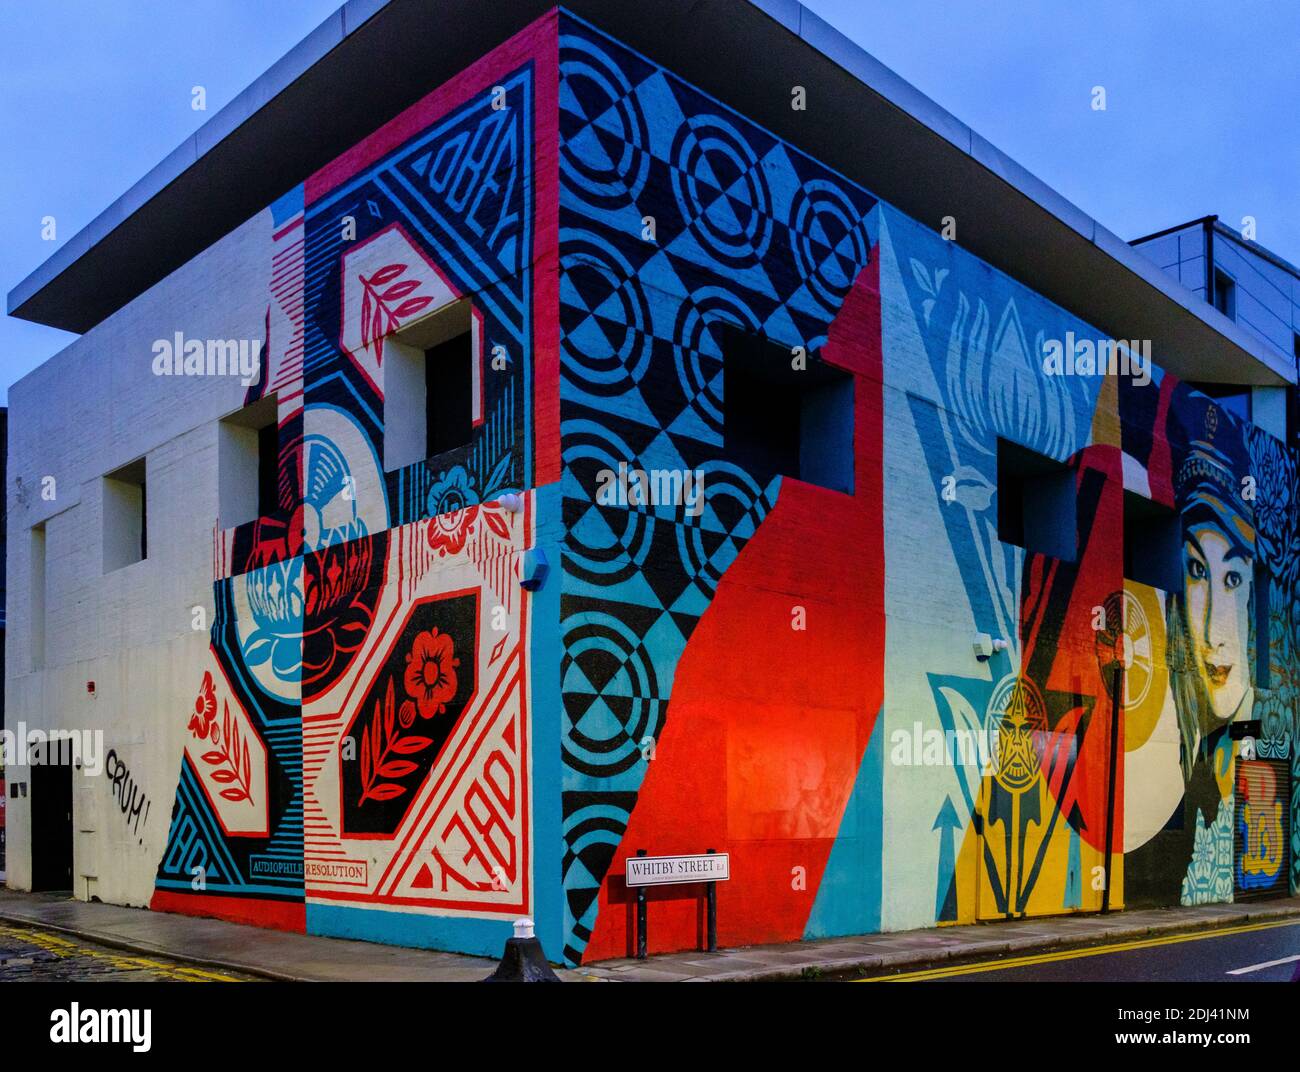 Bright and colourful street art by artist Shepard Fairey on the exterior of a building at Whitby Street Shoreditch London, UK Stock Photo